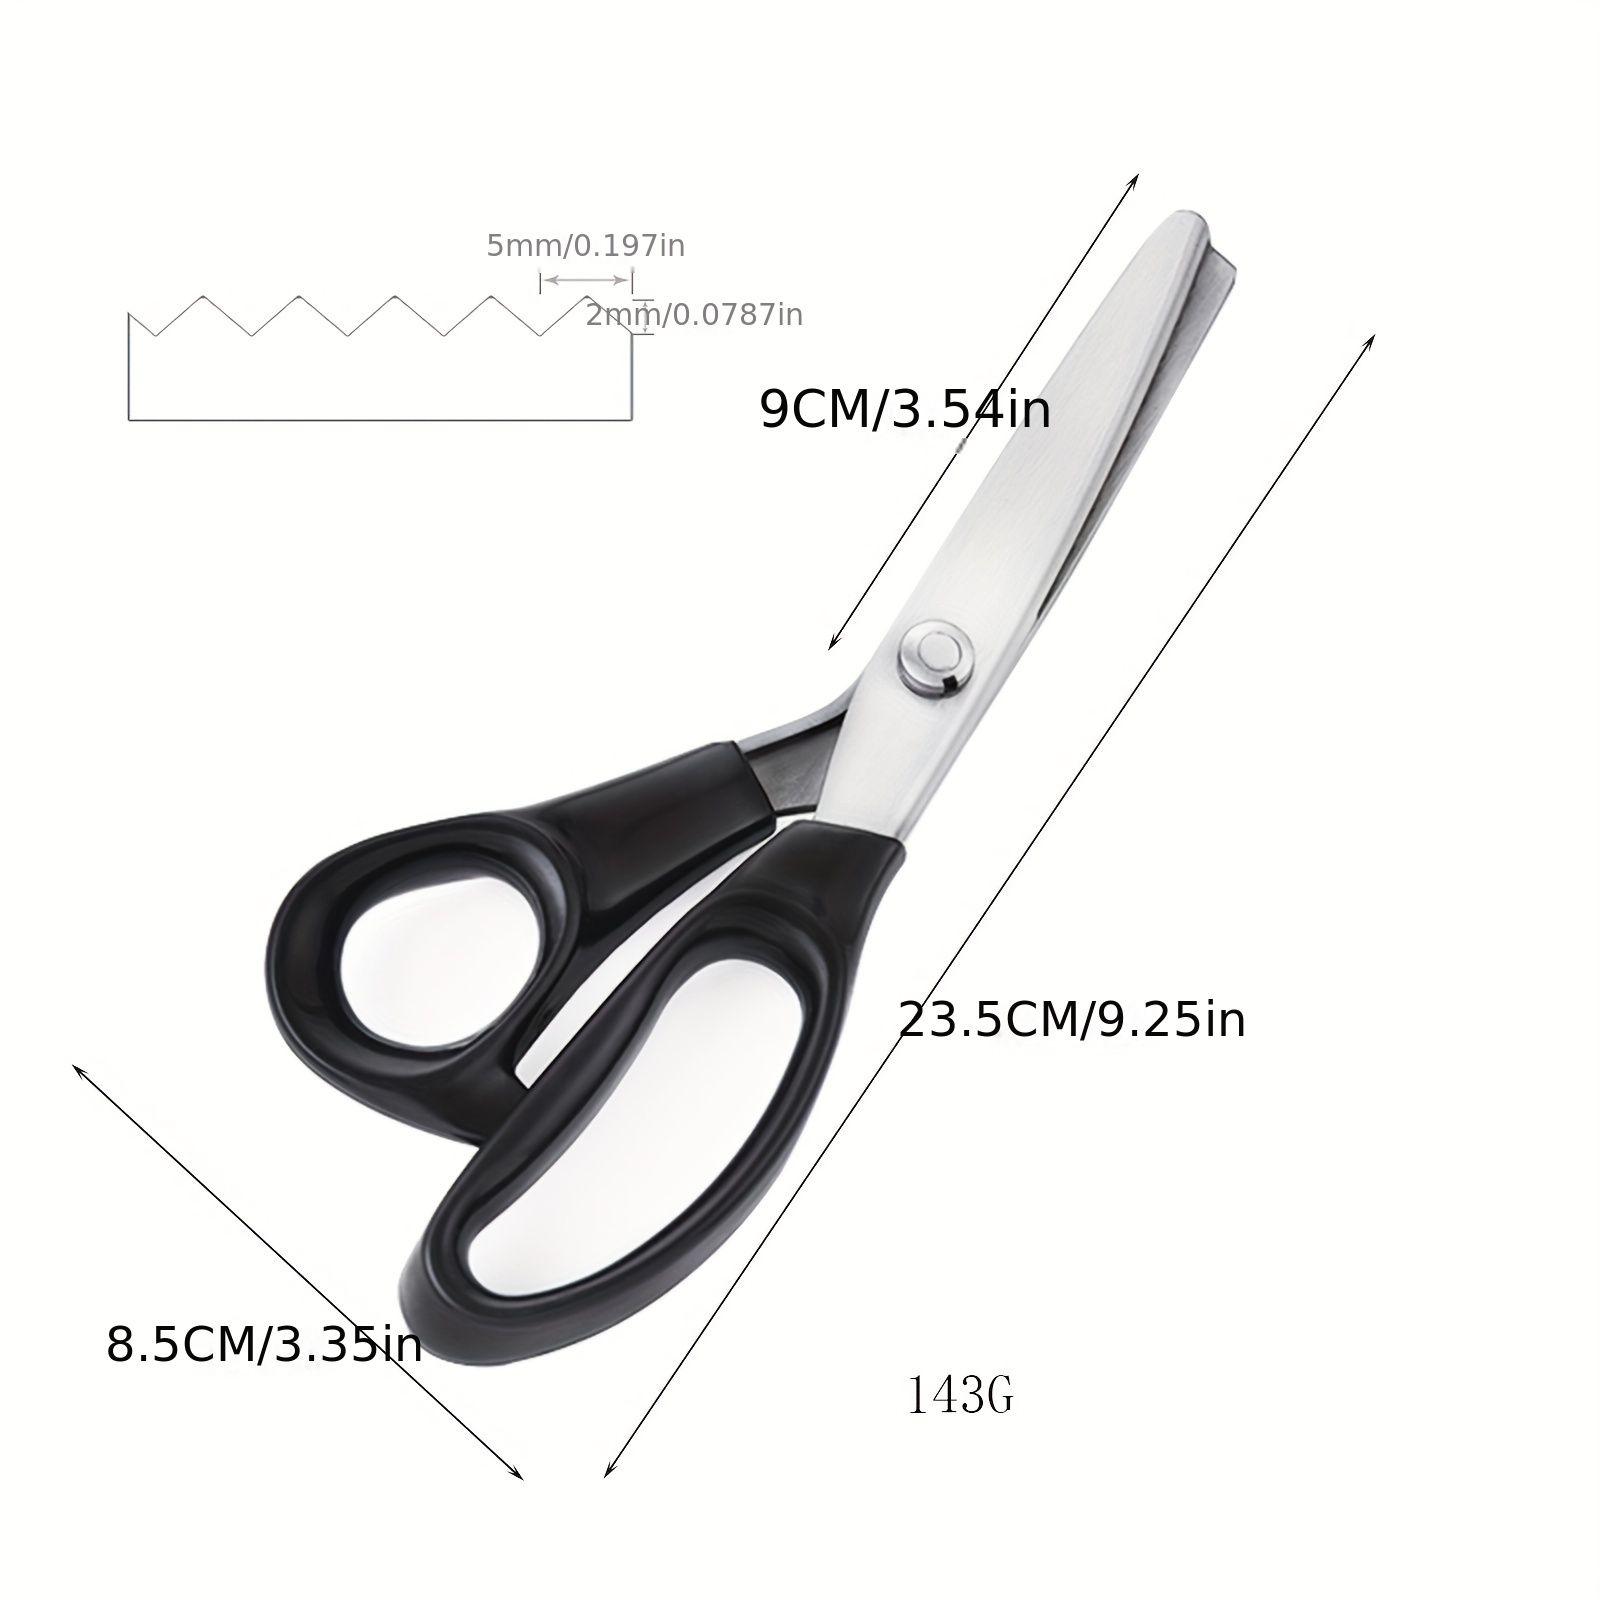 Tailor Scissors - 12 Inch Fabric Embroidery Arts Crafting Shears